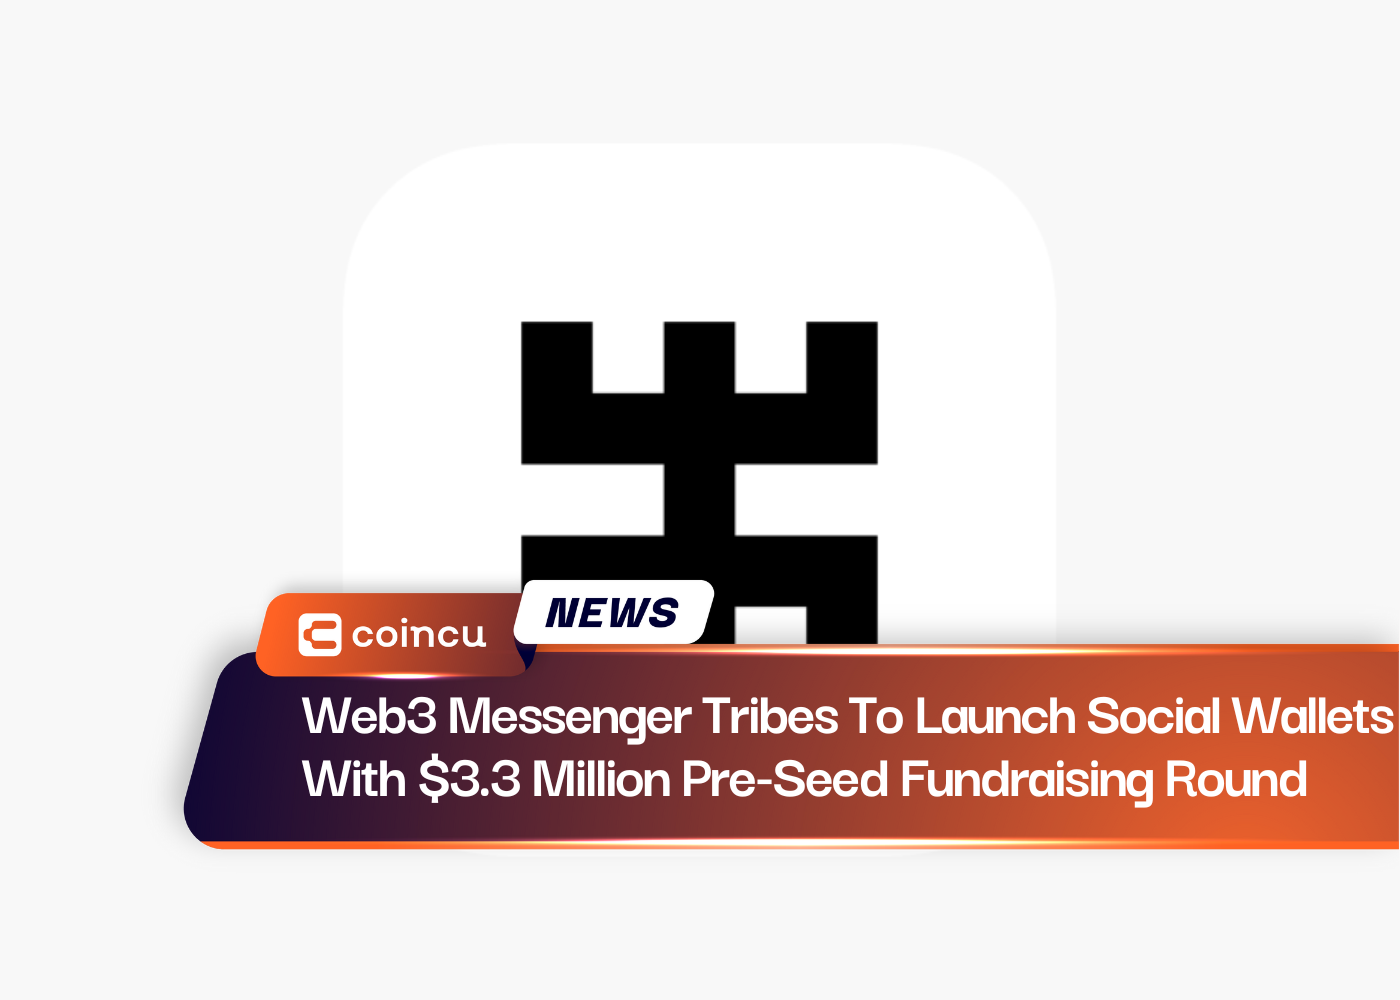 Web3 Messenger Tribes To Launch Social Wallets With $3.3 Million Pre-Seed Fundraising Round